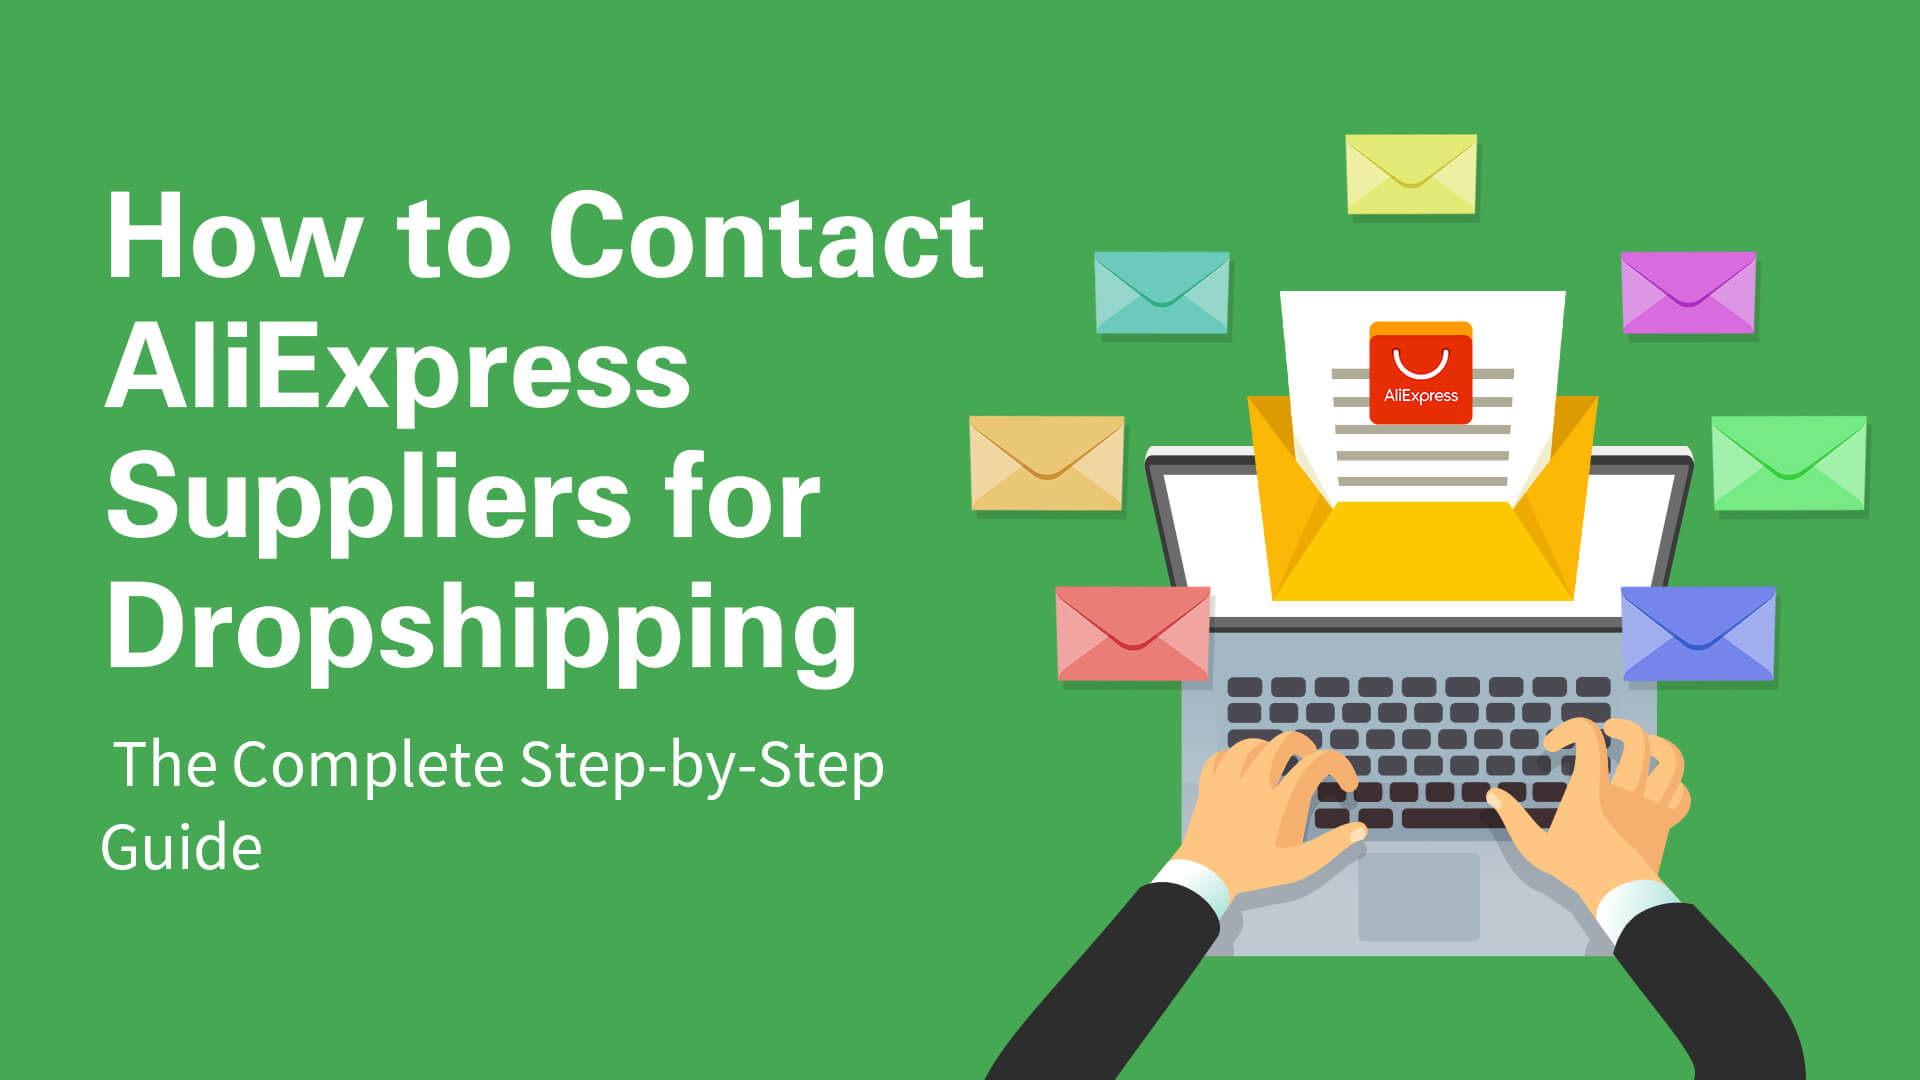 How to Contact AliExpress Suppliers for Dropshipping - Complete Guide